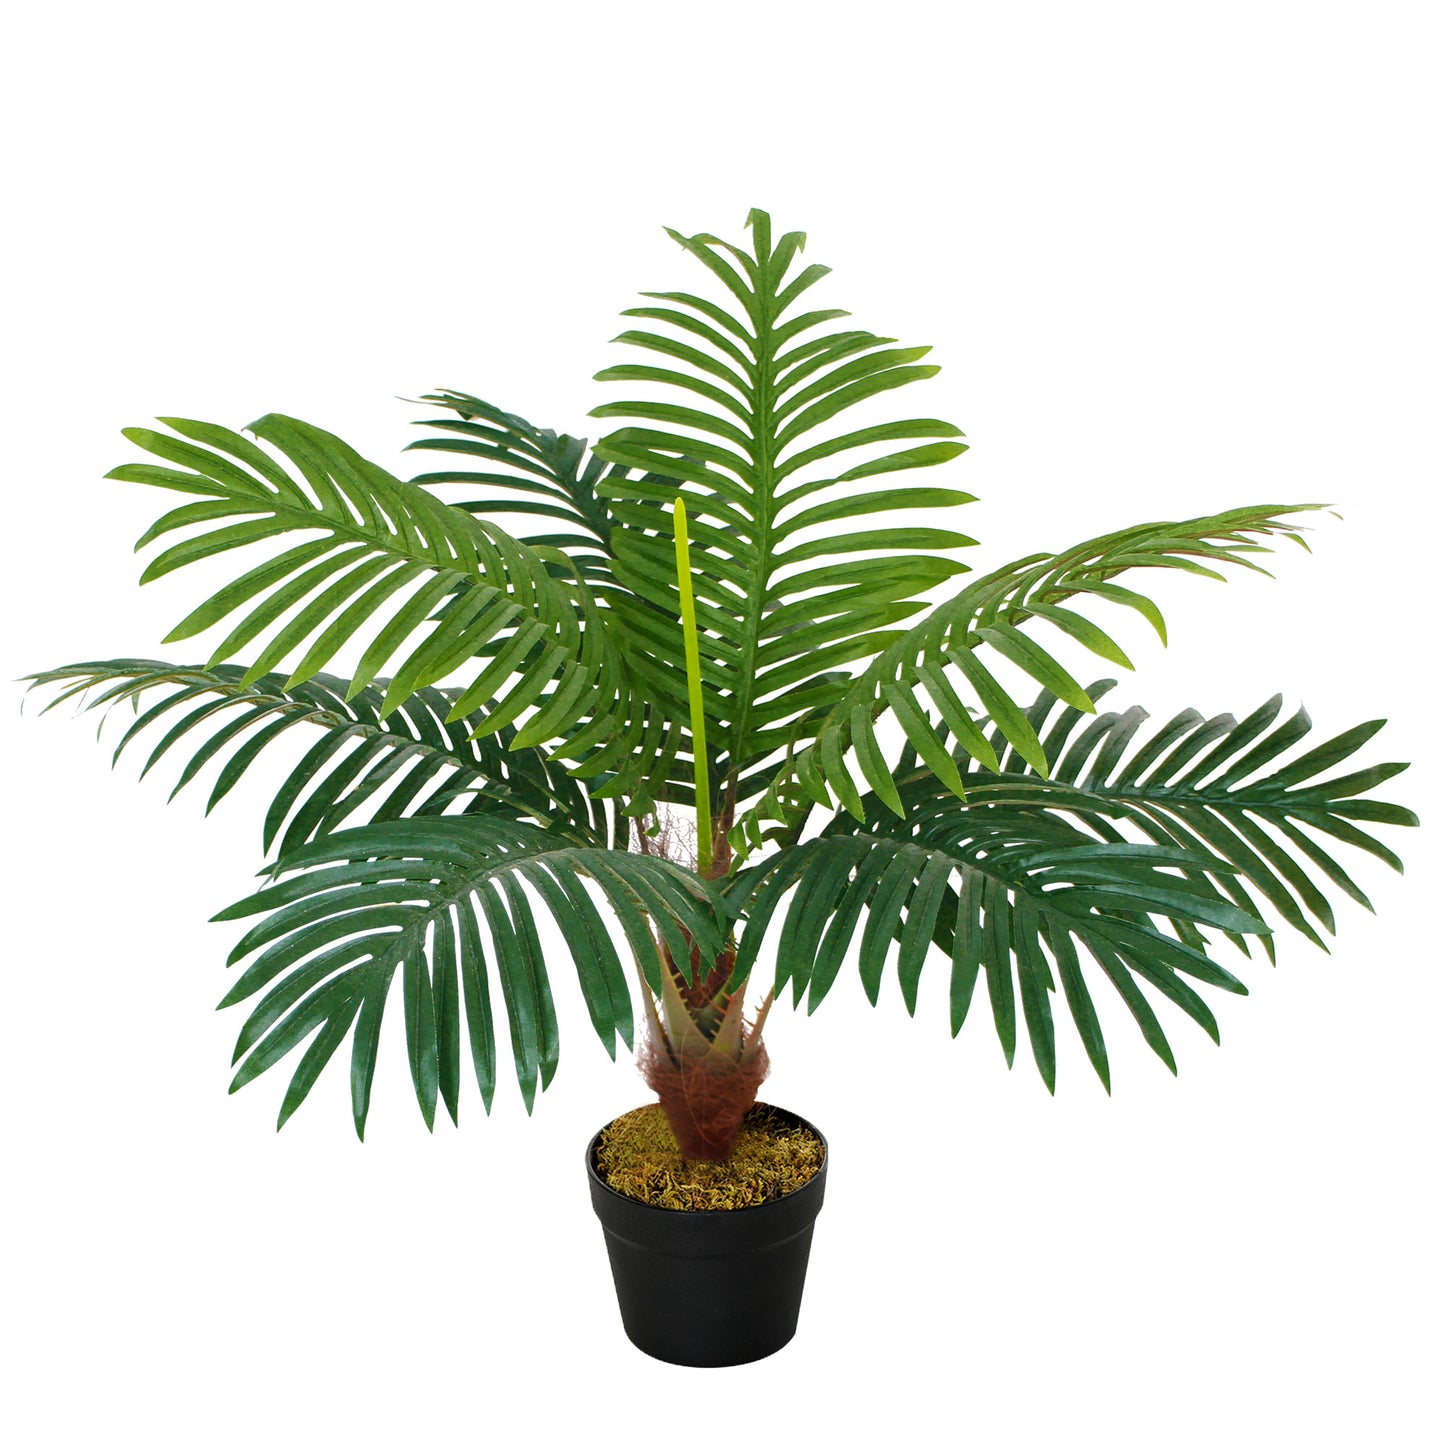 Outsunny Artificial Palm Plant Realistic Fake Tree Potted Home Office Décor 60cm